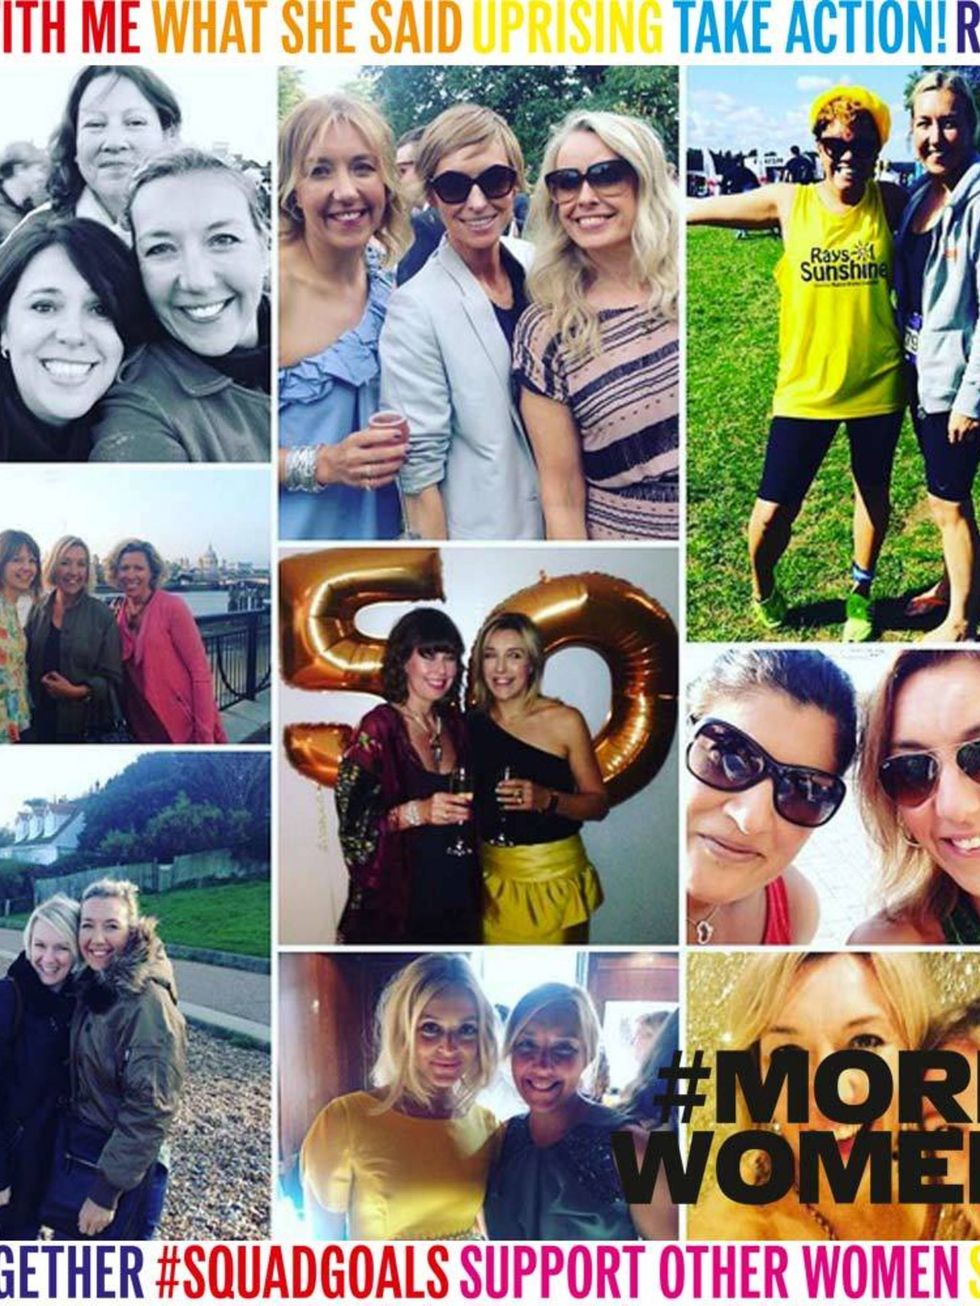 Victoria White (@vicawhite)

'am sure I've missed loads of amazing female friends from this so apologies but this is to celebrate ALL my fab female mates as part of #ellefeminism #morewomen campaign love ya all'